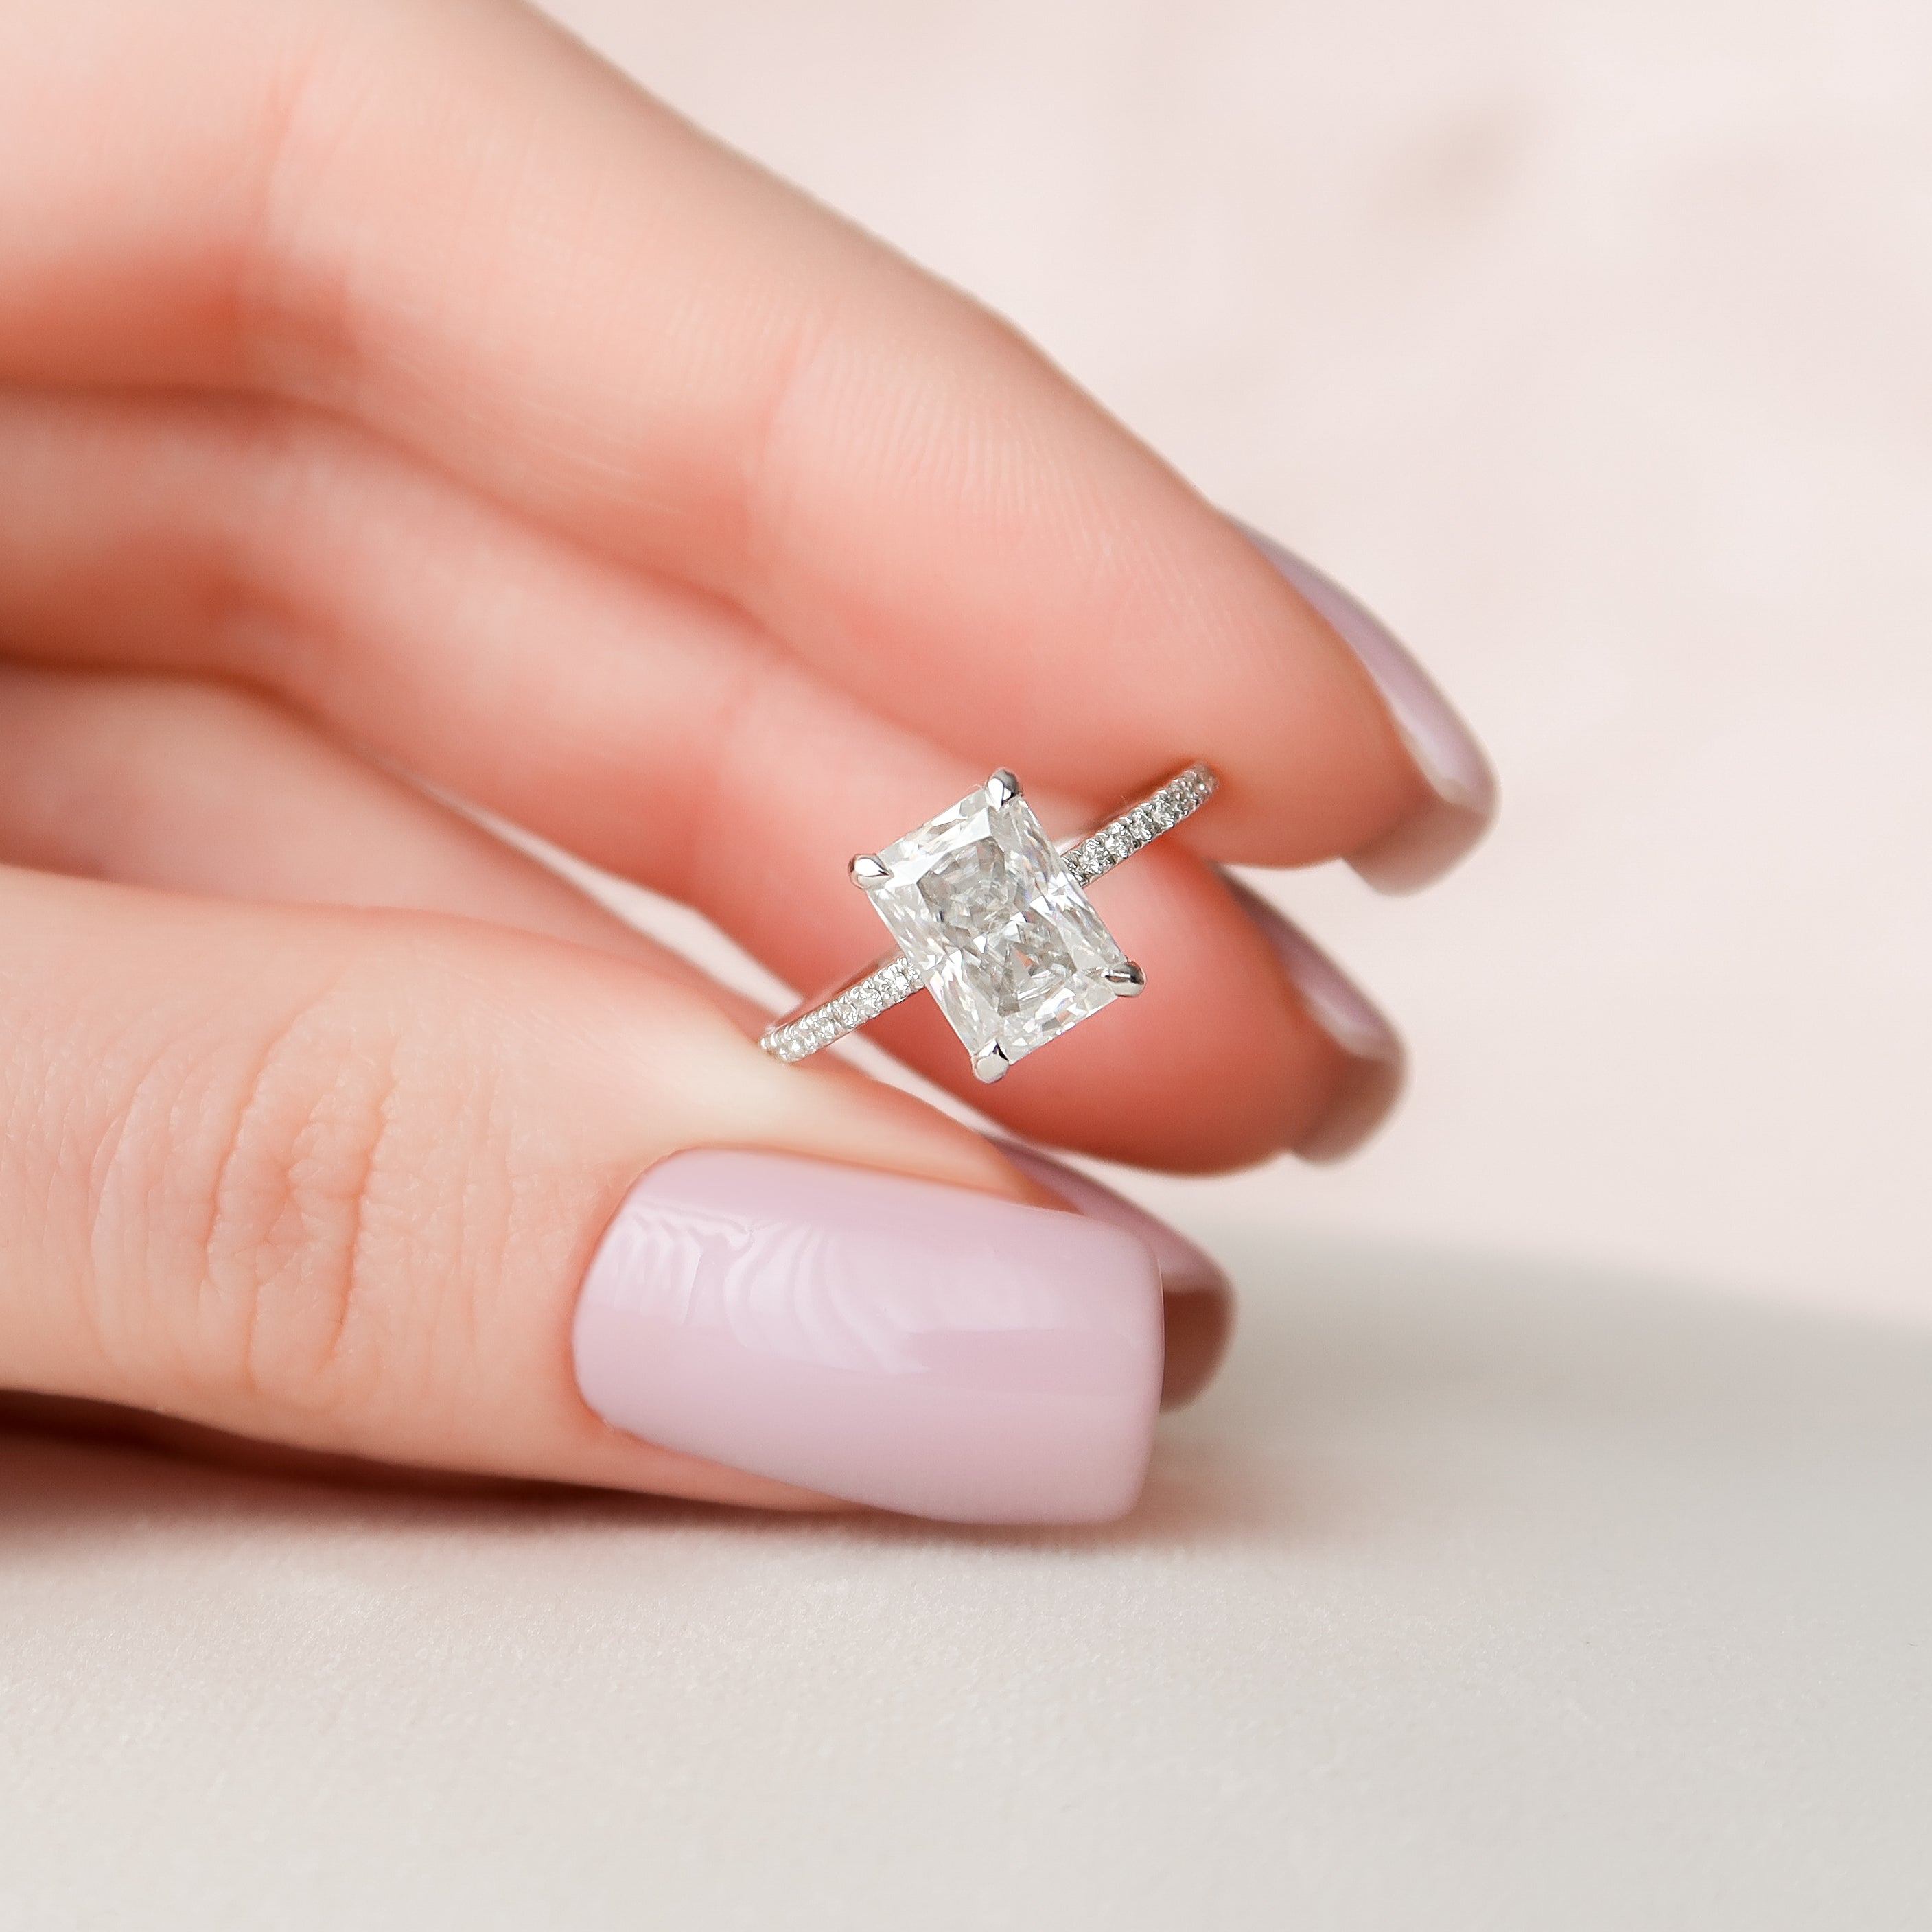 Why Your Engagement Ring Needs A 2 Carat Moissanite